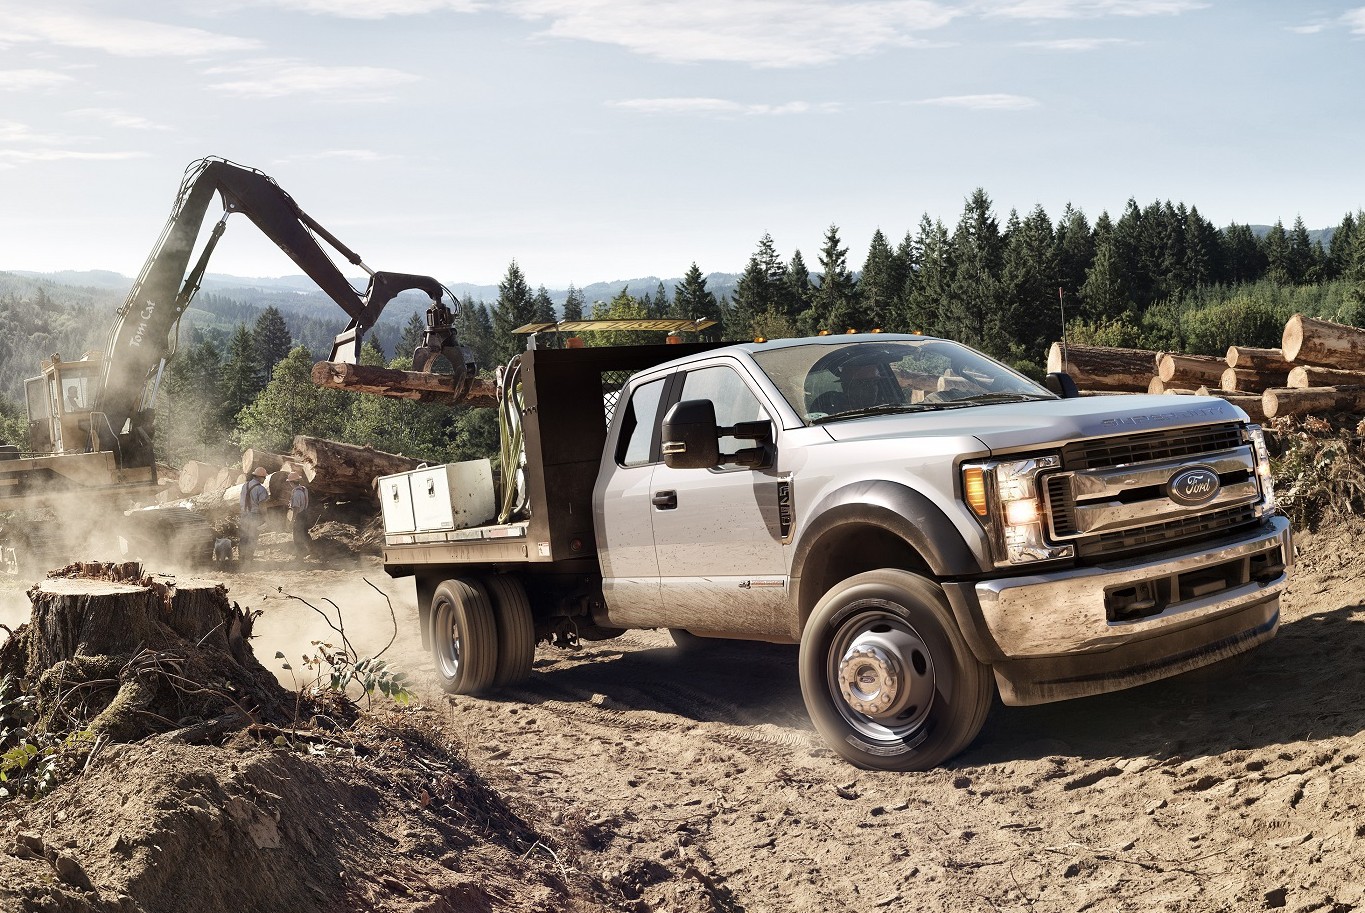 Ford F-450 Super Duty chassis cab logging: Super Duty chassis cab with Ford-designed, Ford-built 6.7-liter Power Stroke® V8 diesel engine increases ratings to 330 horsepower and 750 lb.-ft. of torque – best-ever for Class 4 and Class 5 segments.